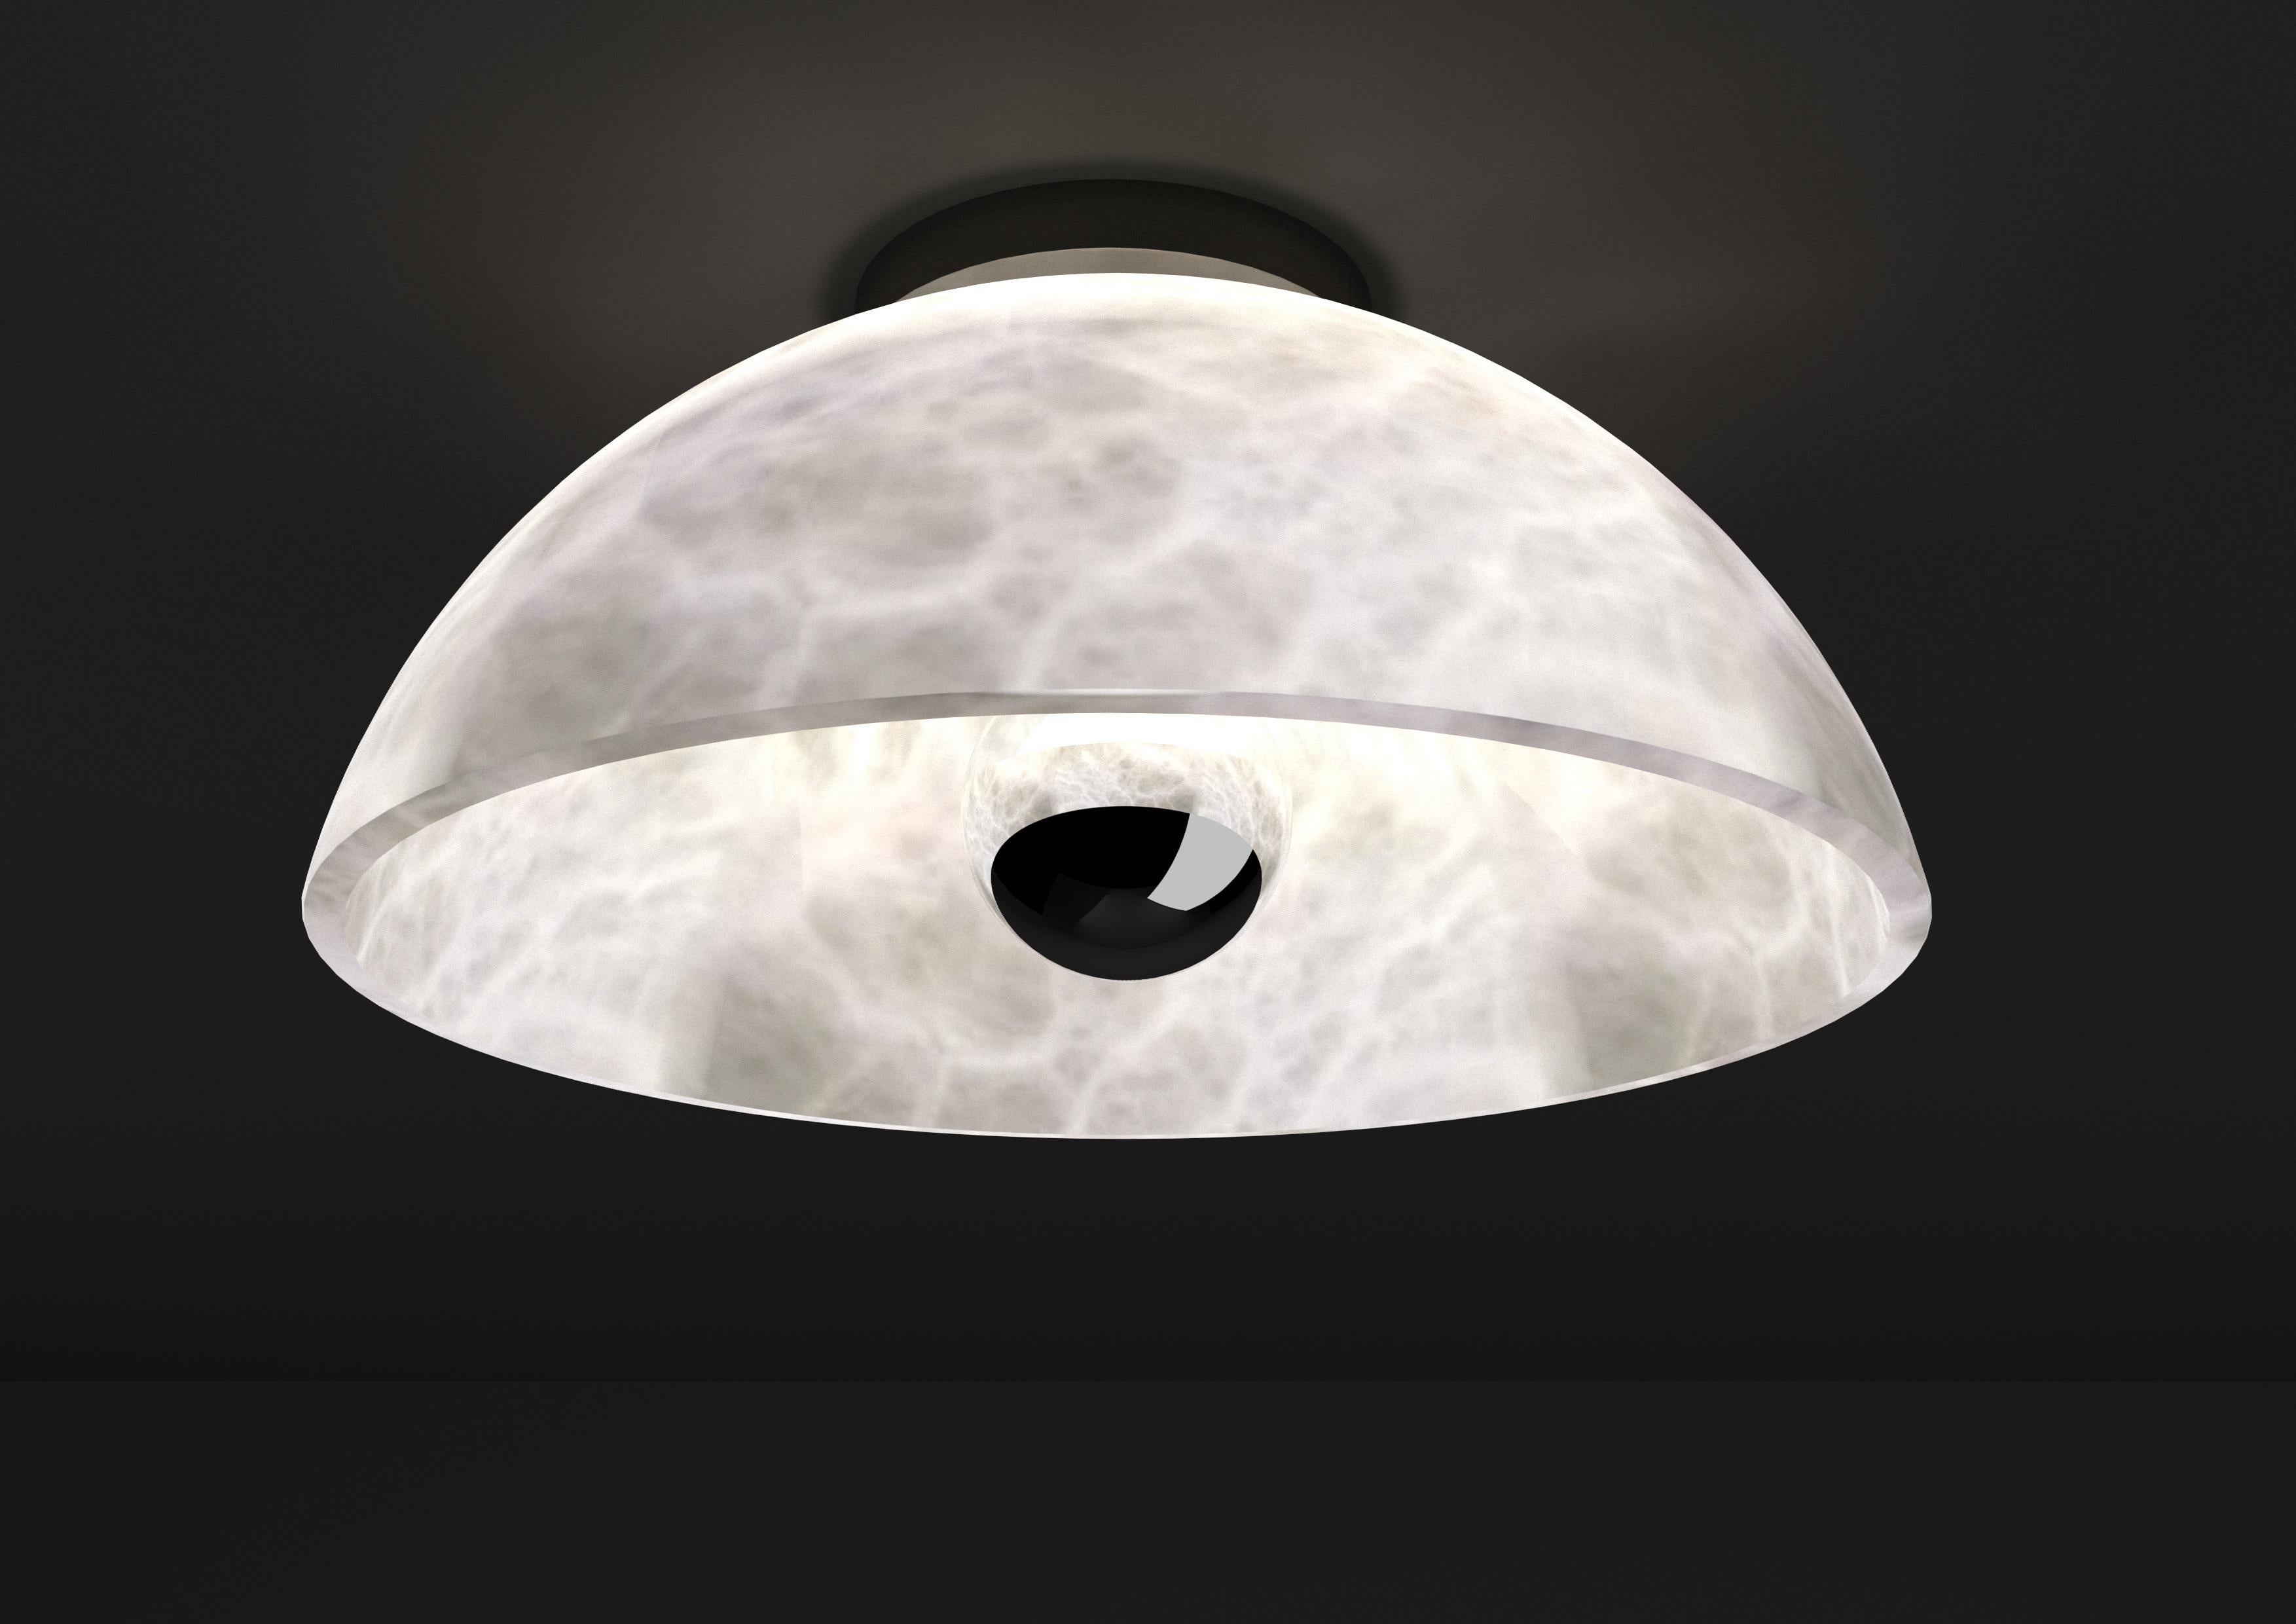 Apollo Brushed Metal Ceiling Lamp by Alabastro Italiano
Dimensions: Ø 30 x W 17,5 cm.
Materials: White alabaster and metal.

Available in different finishes: Shiny Silver, Bronze, Brushed Brass, Ruggine of Florence, Brushed Burnished, Shiny Gold,